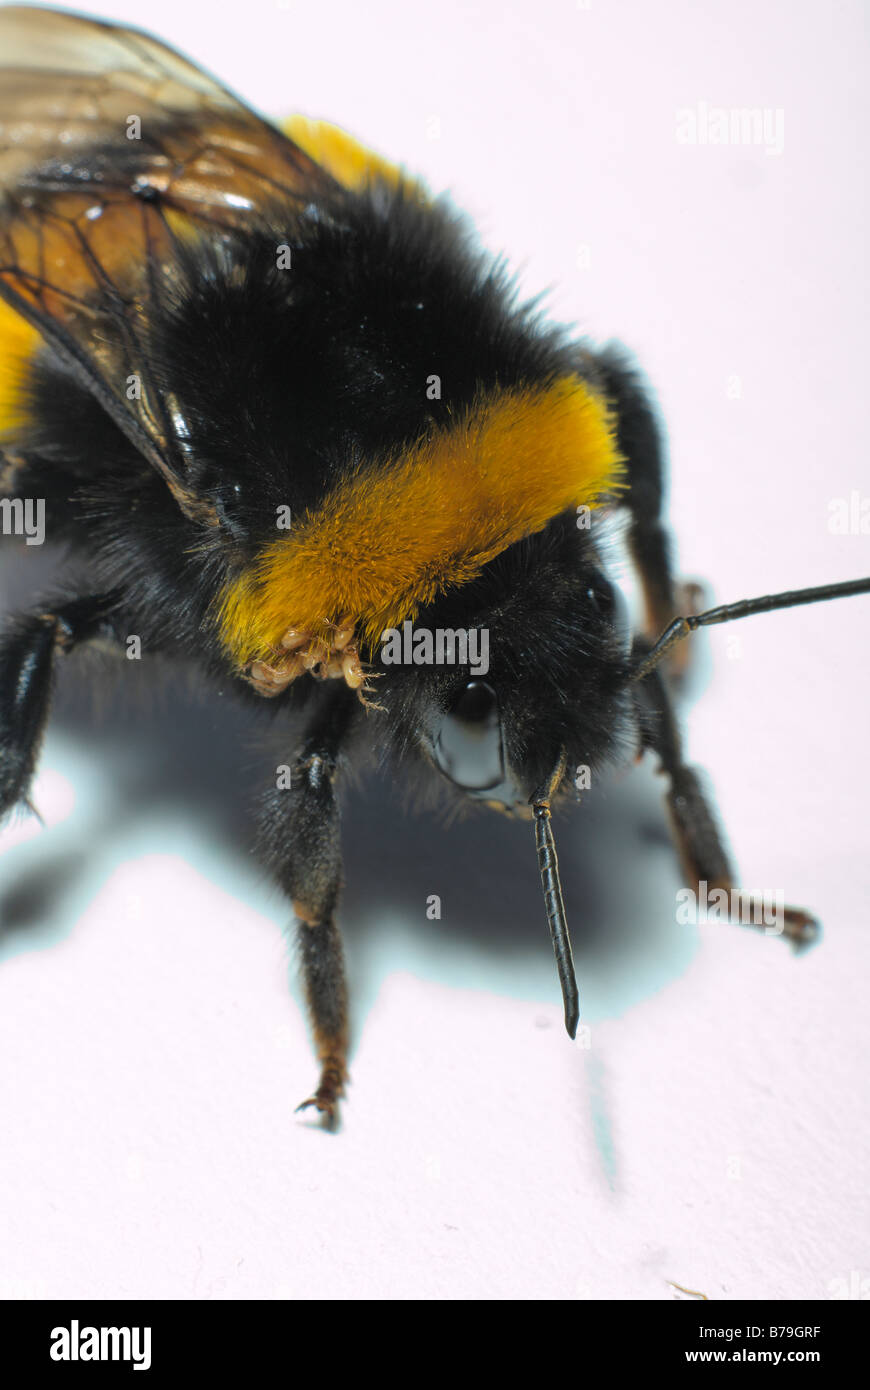 close-up of the front of a bumblebee on white background with several parasitic mites attached to its body. Stock Photo